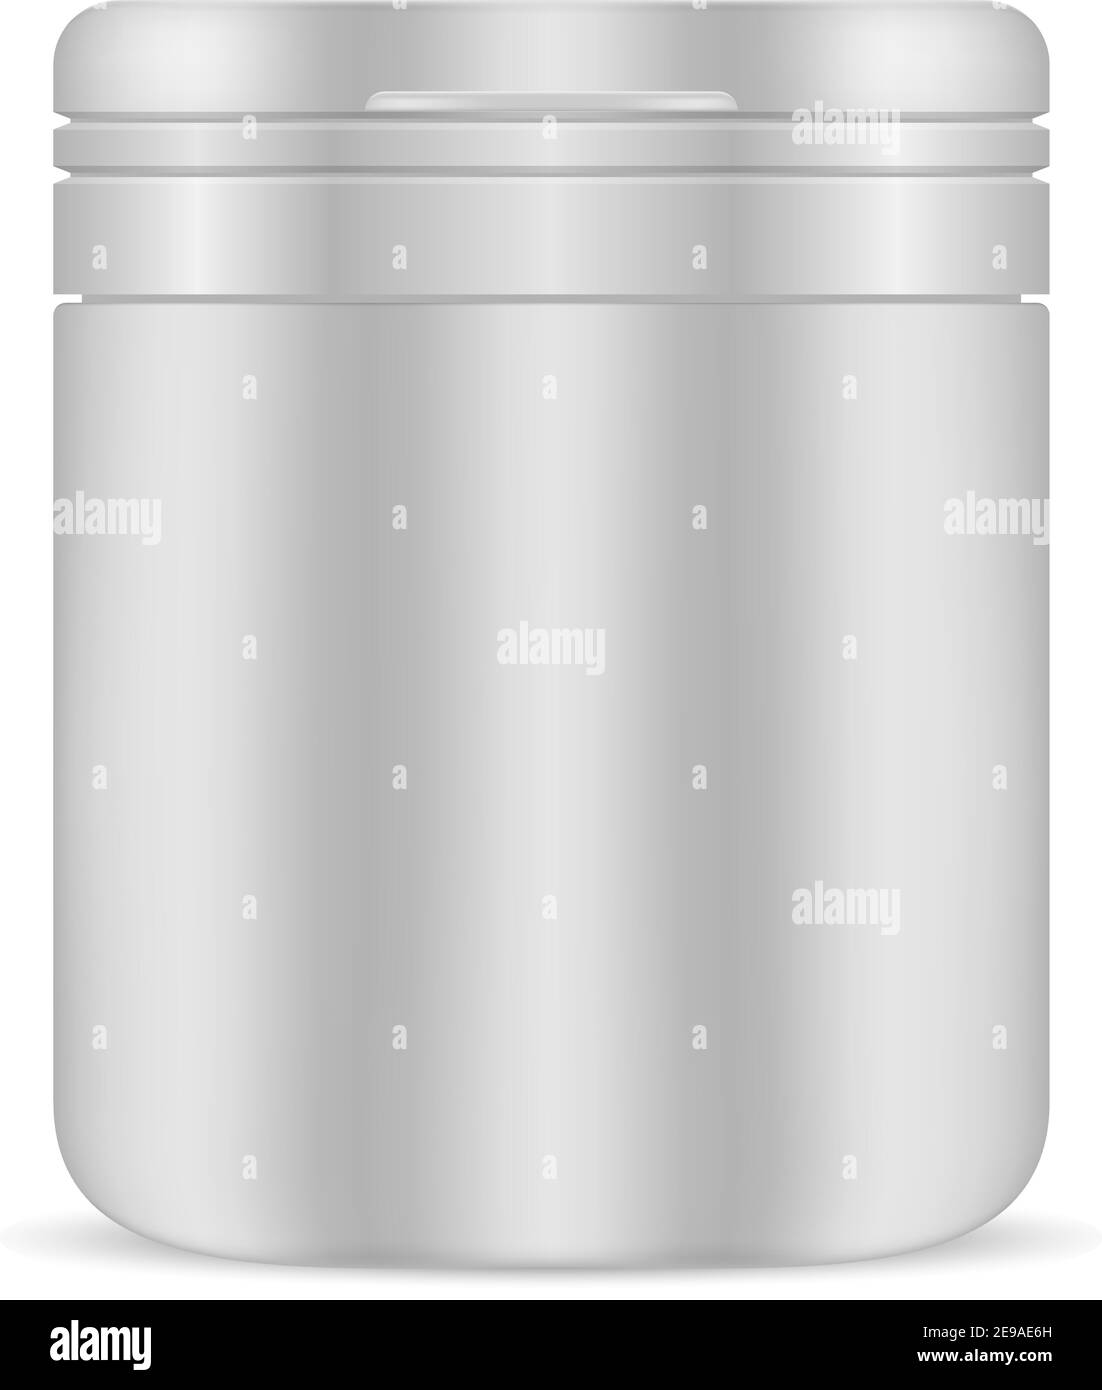 Pill Bottle. White Blank Vector Package. 3d Plastic Container for Medicine Vitamin, Isolated. Supplement Jar with Cap. Round Pharmaceutical Tablet Box Stock Vector